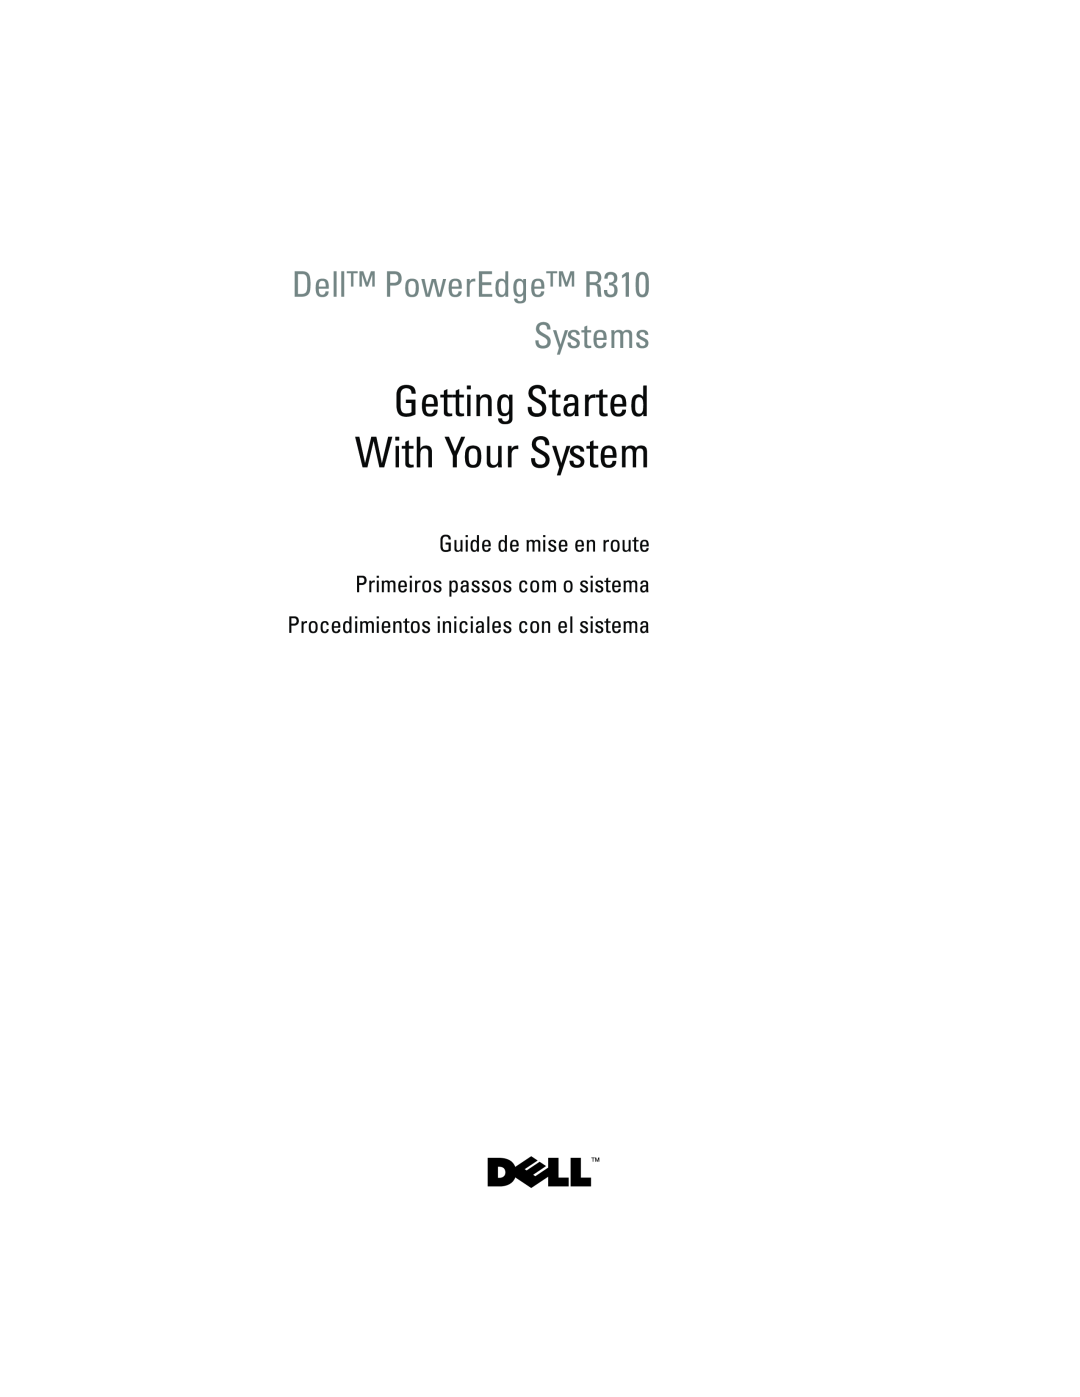 Dell manual Getting Started With Your System, Dell PowerEdge R310 Systems, Procedimientos iniciales con el sistema 